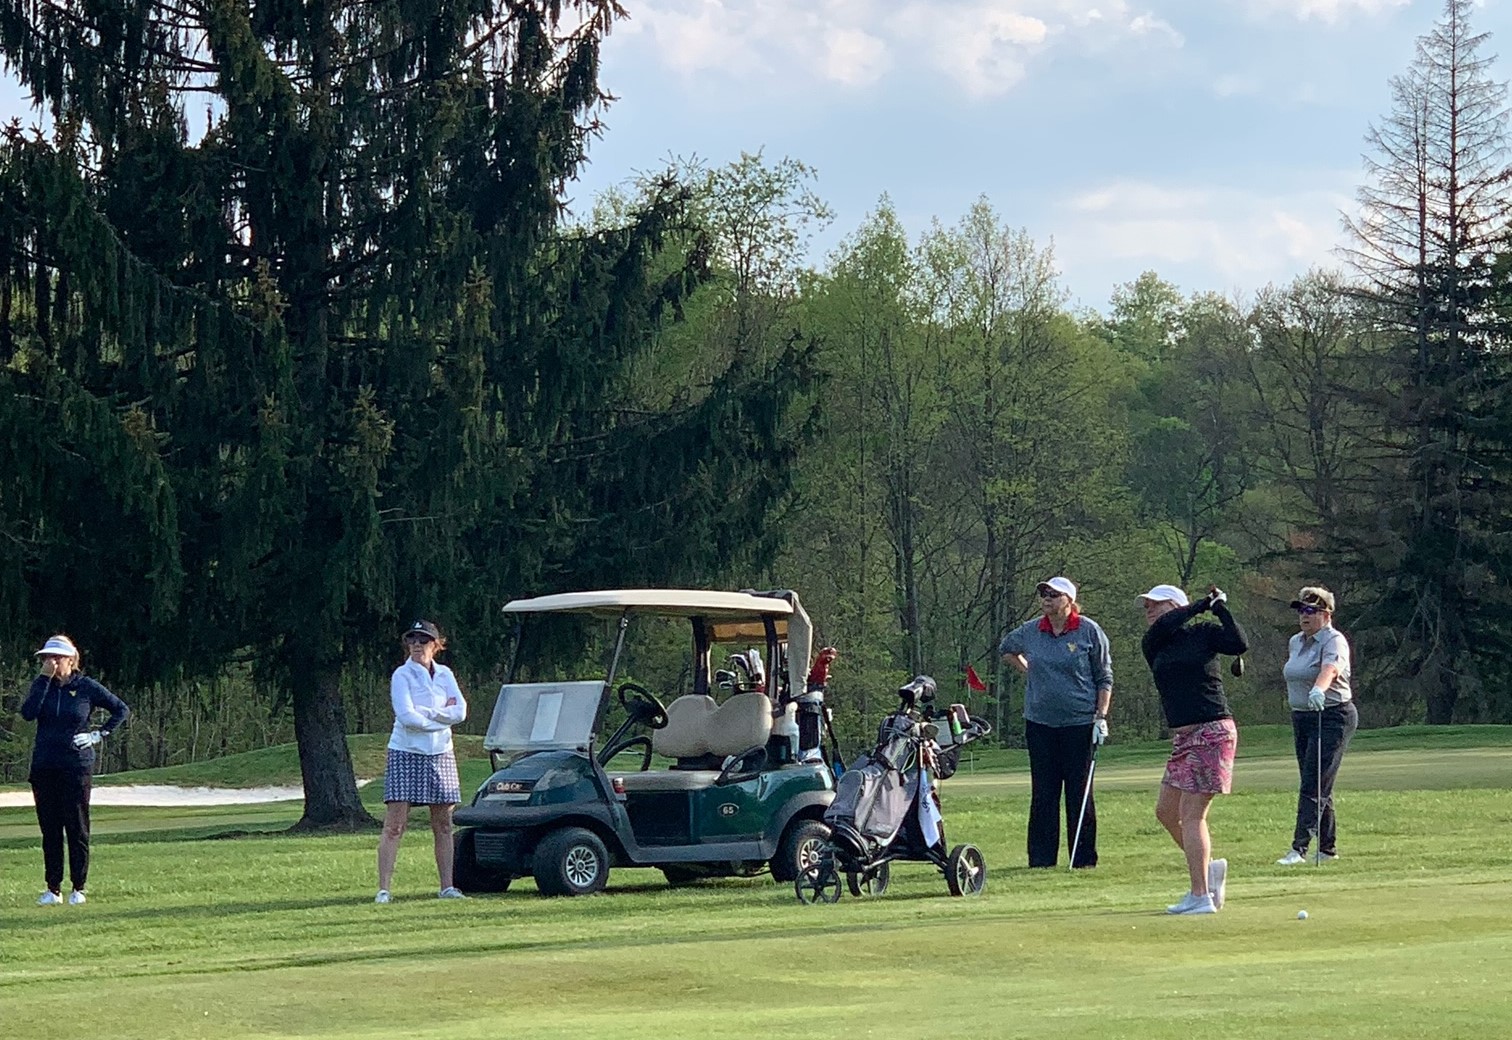 Wednesday Ladies Golf League (WLGL) at The Pines Country Club